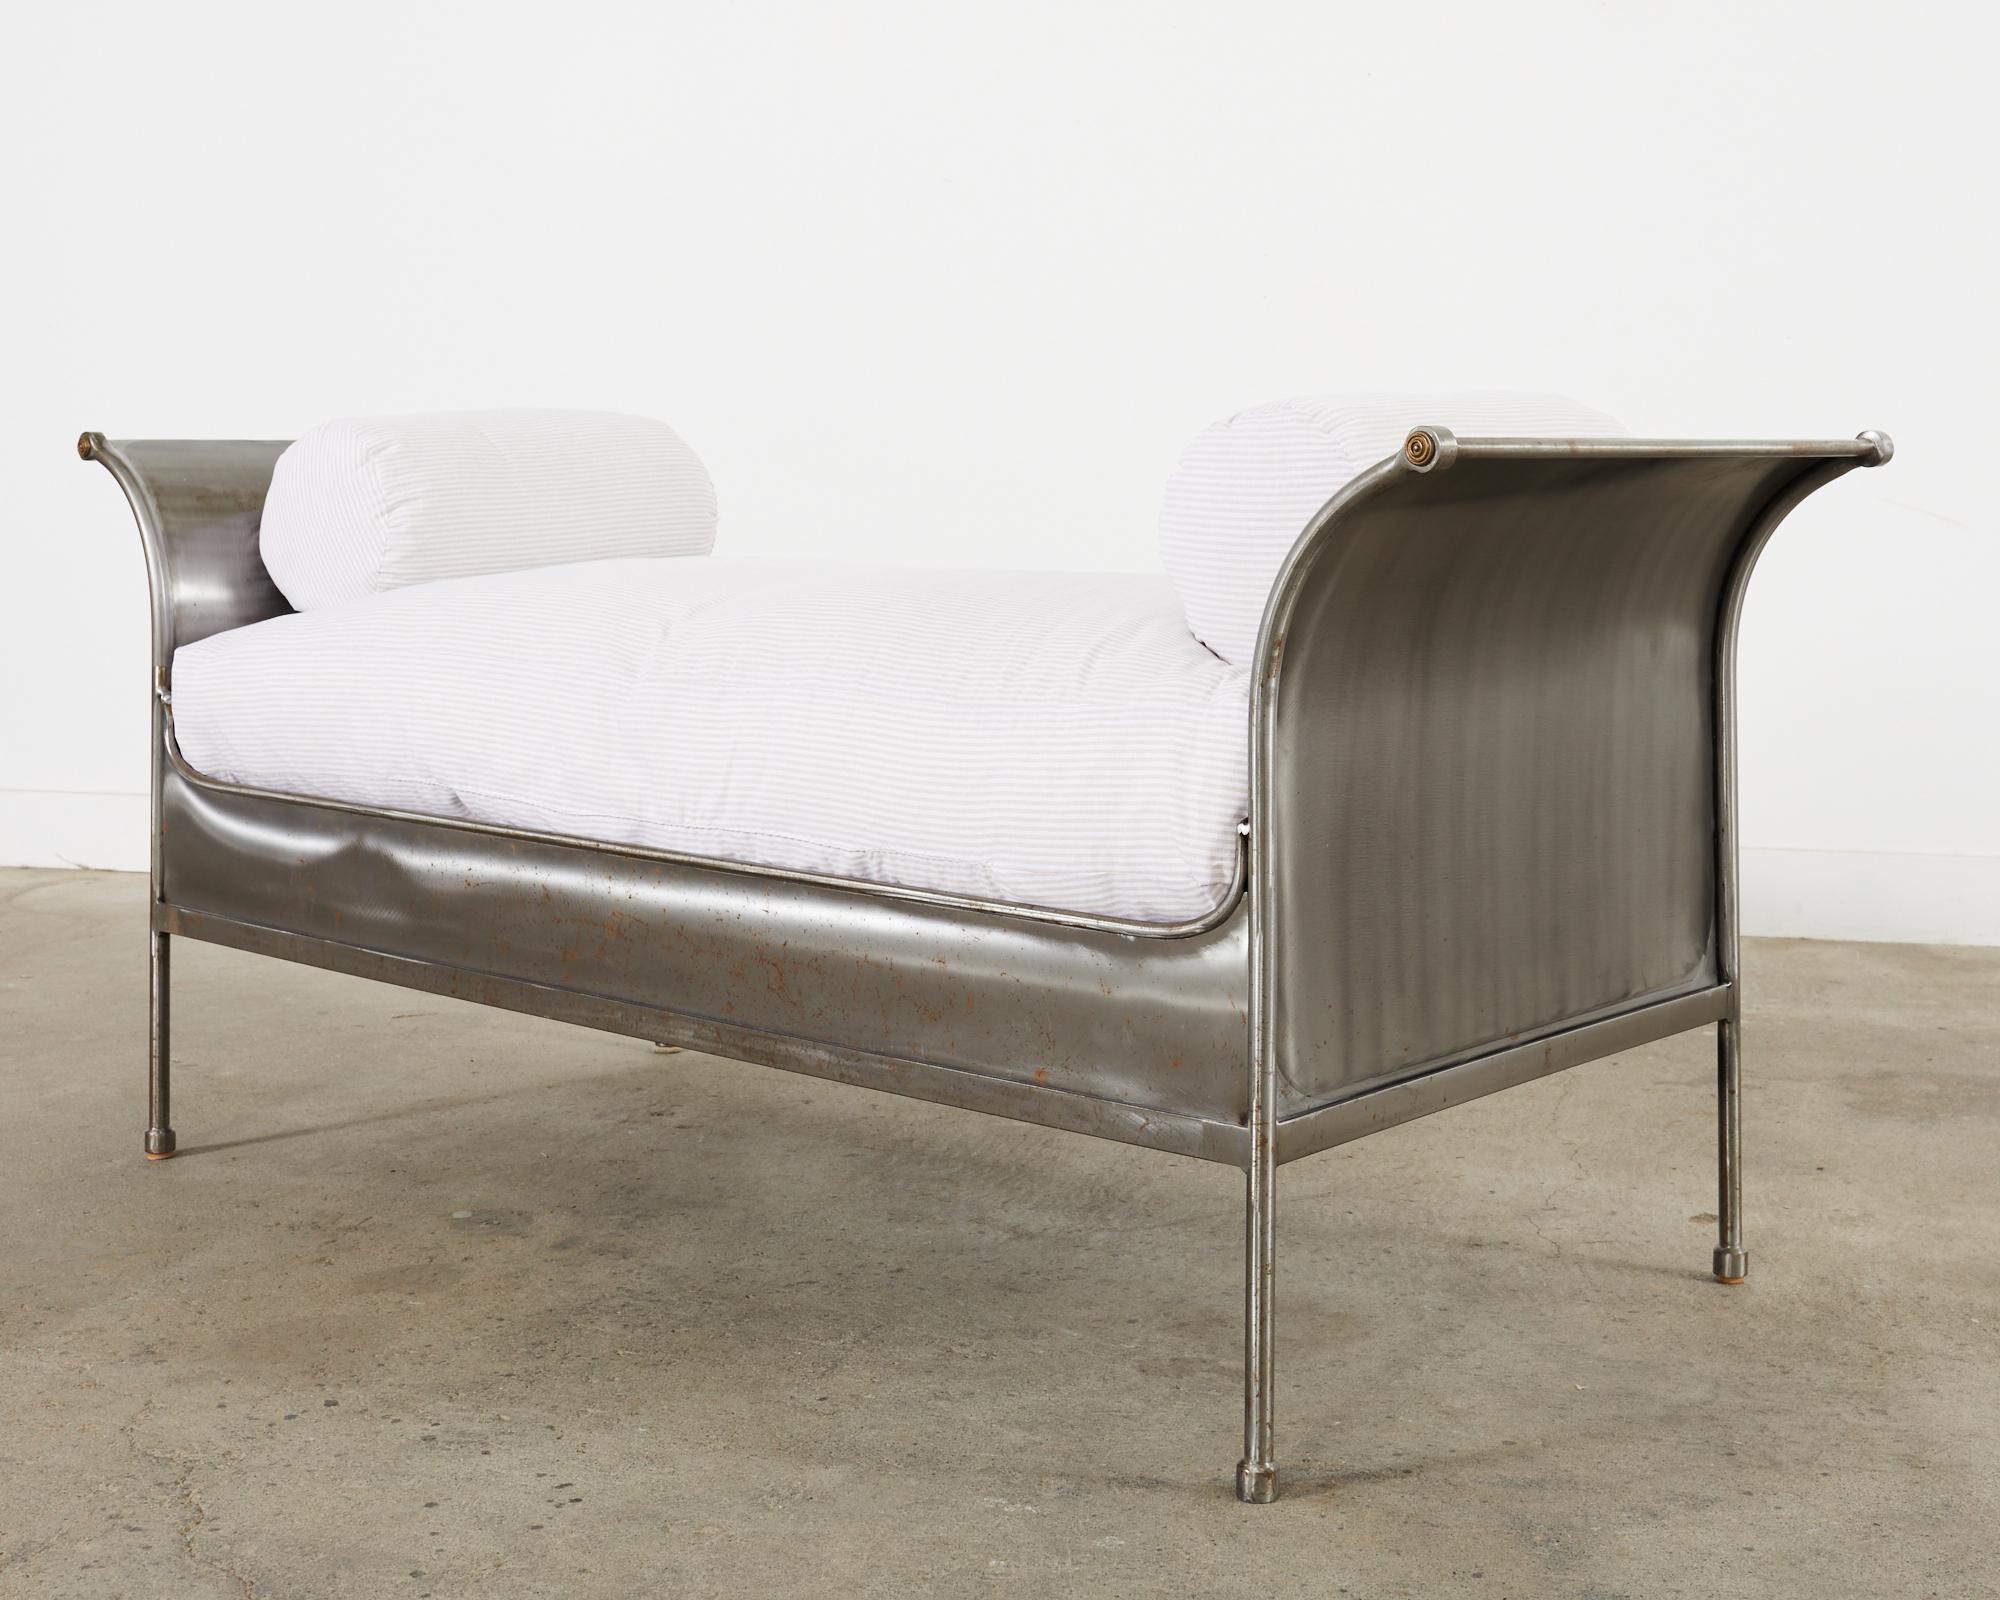 Mid-Century Modern Midcentury French Industrial Style Steel Sleigh Daybed